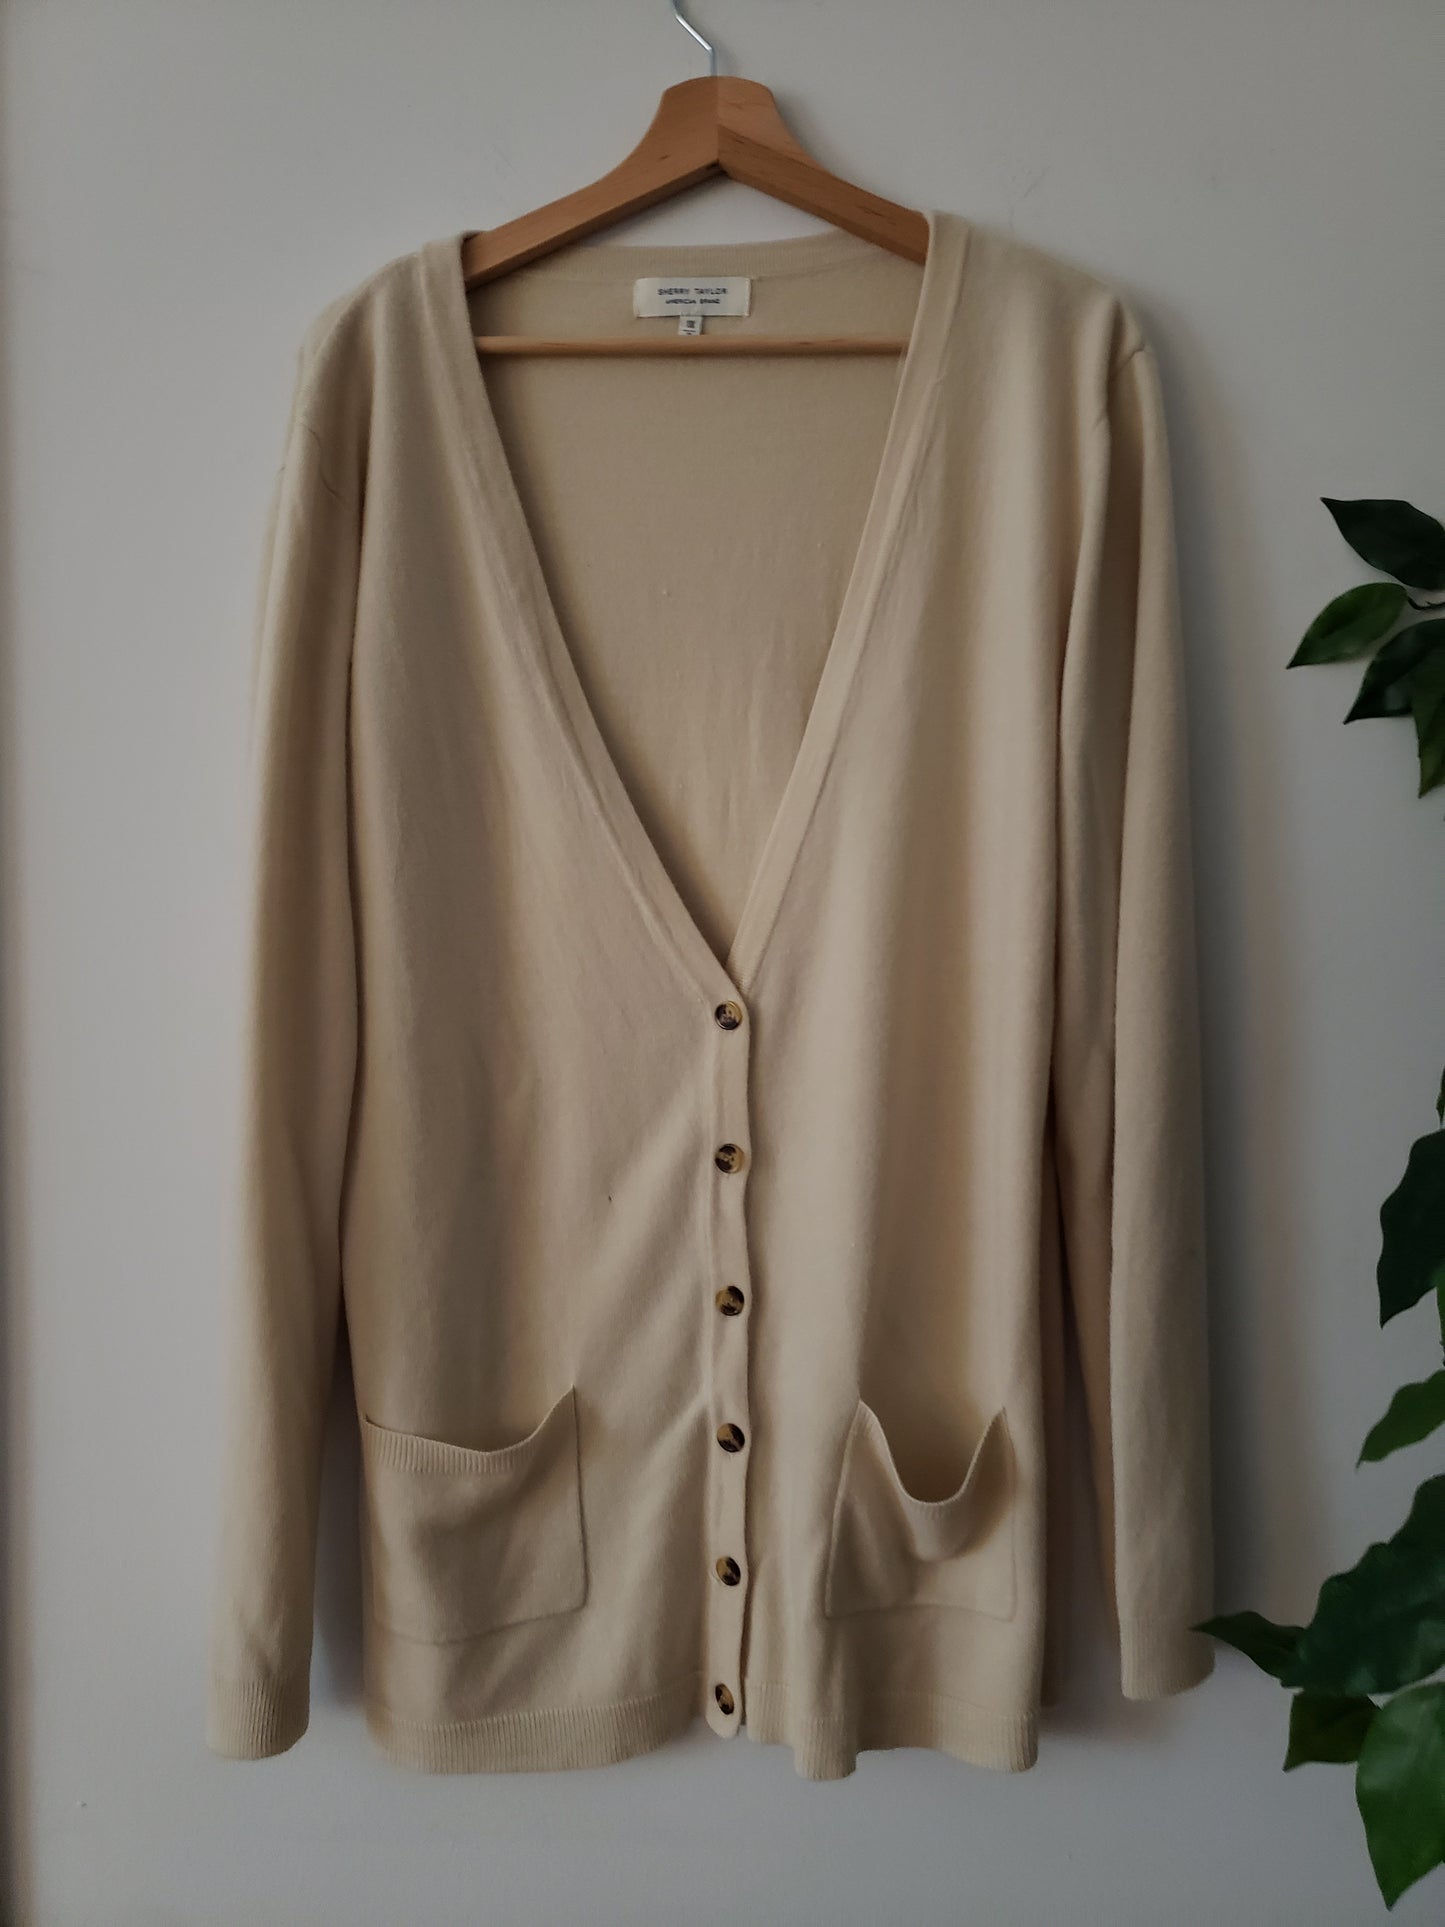 SHERRY TAYLOR CREAM DUSTER CARDIGAN SIZE 1X